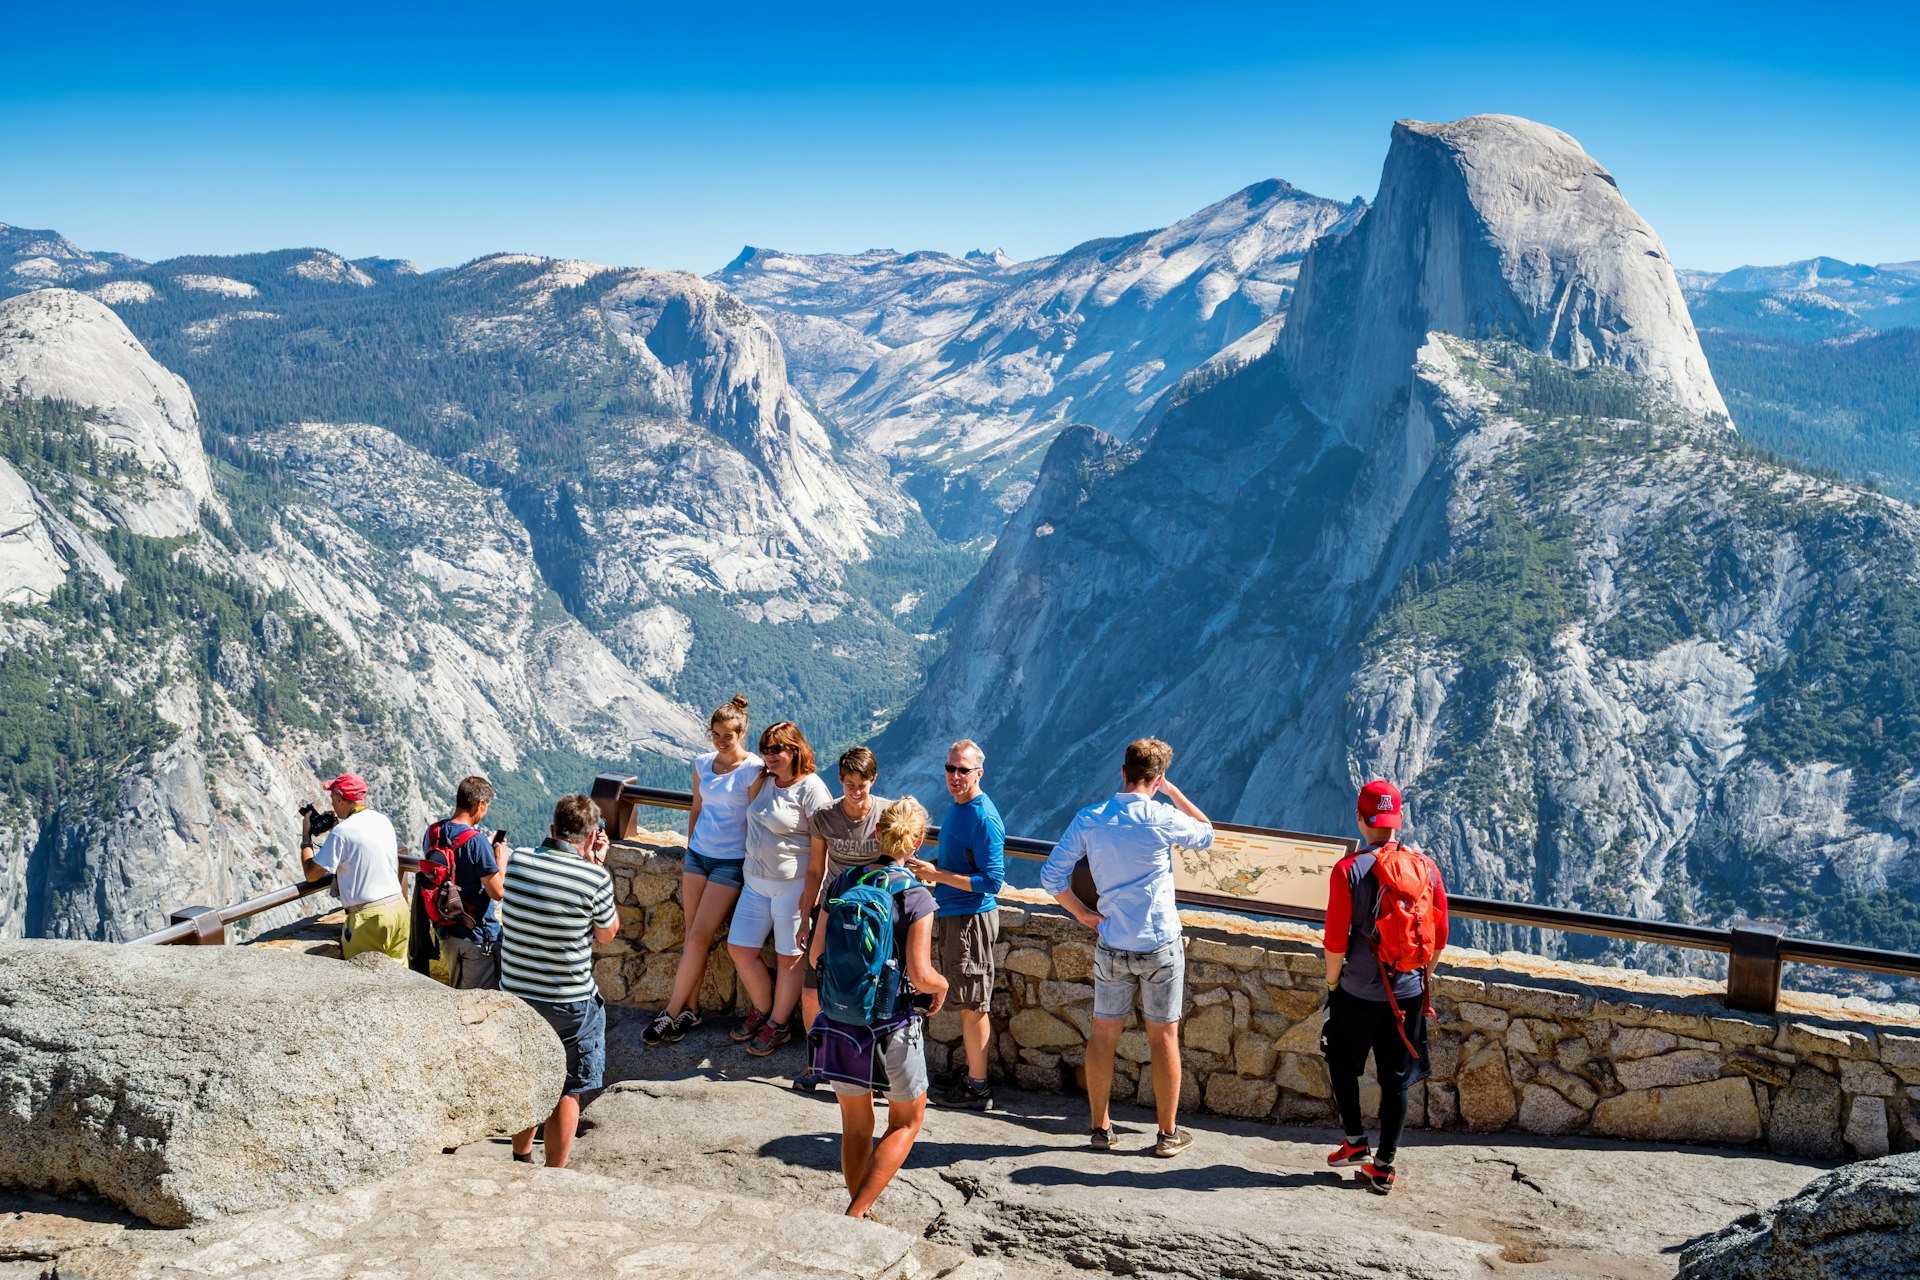 Visitors enjoy the view from Glacier Point lookout in Yosemite National Park, California